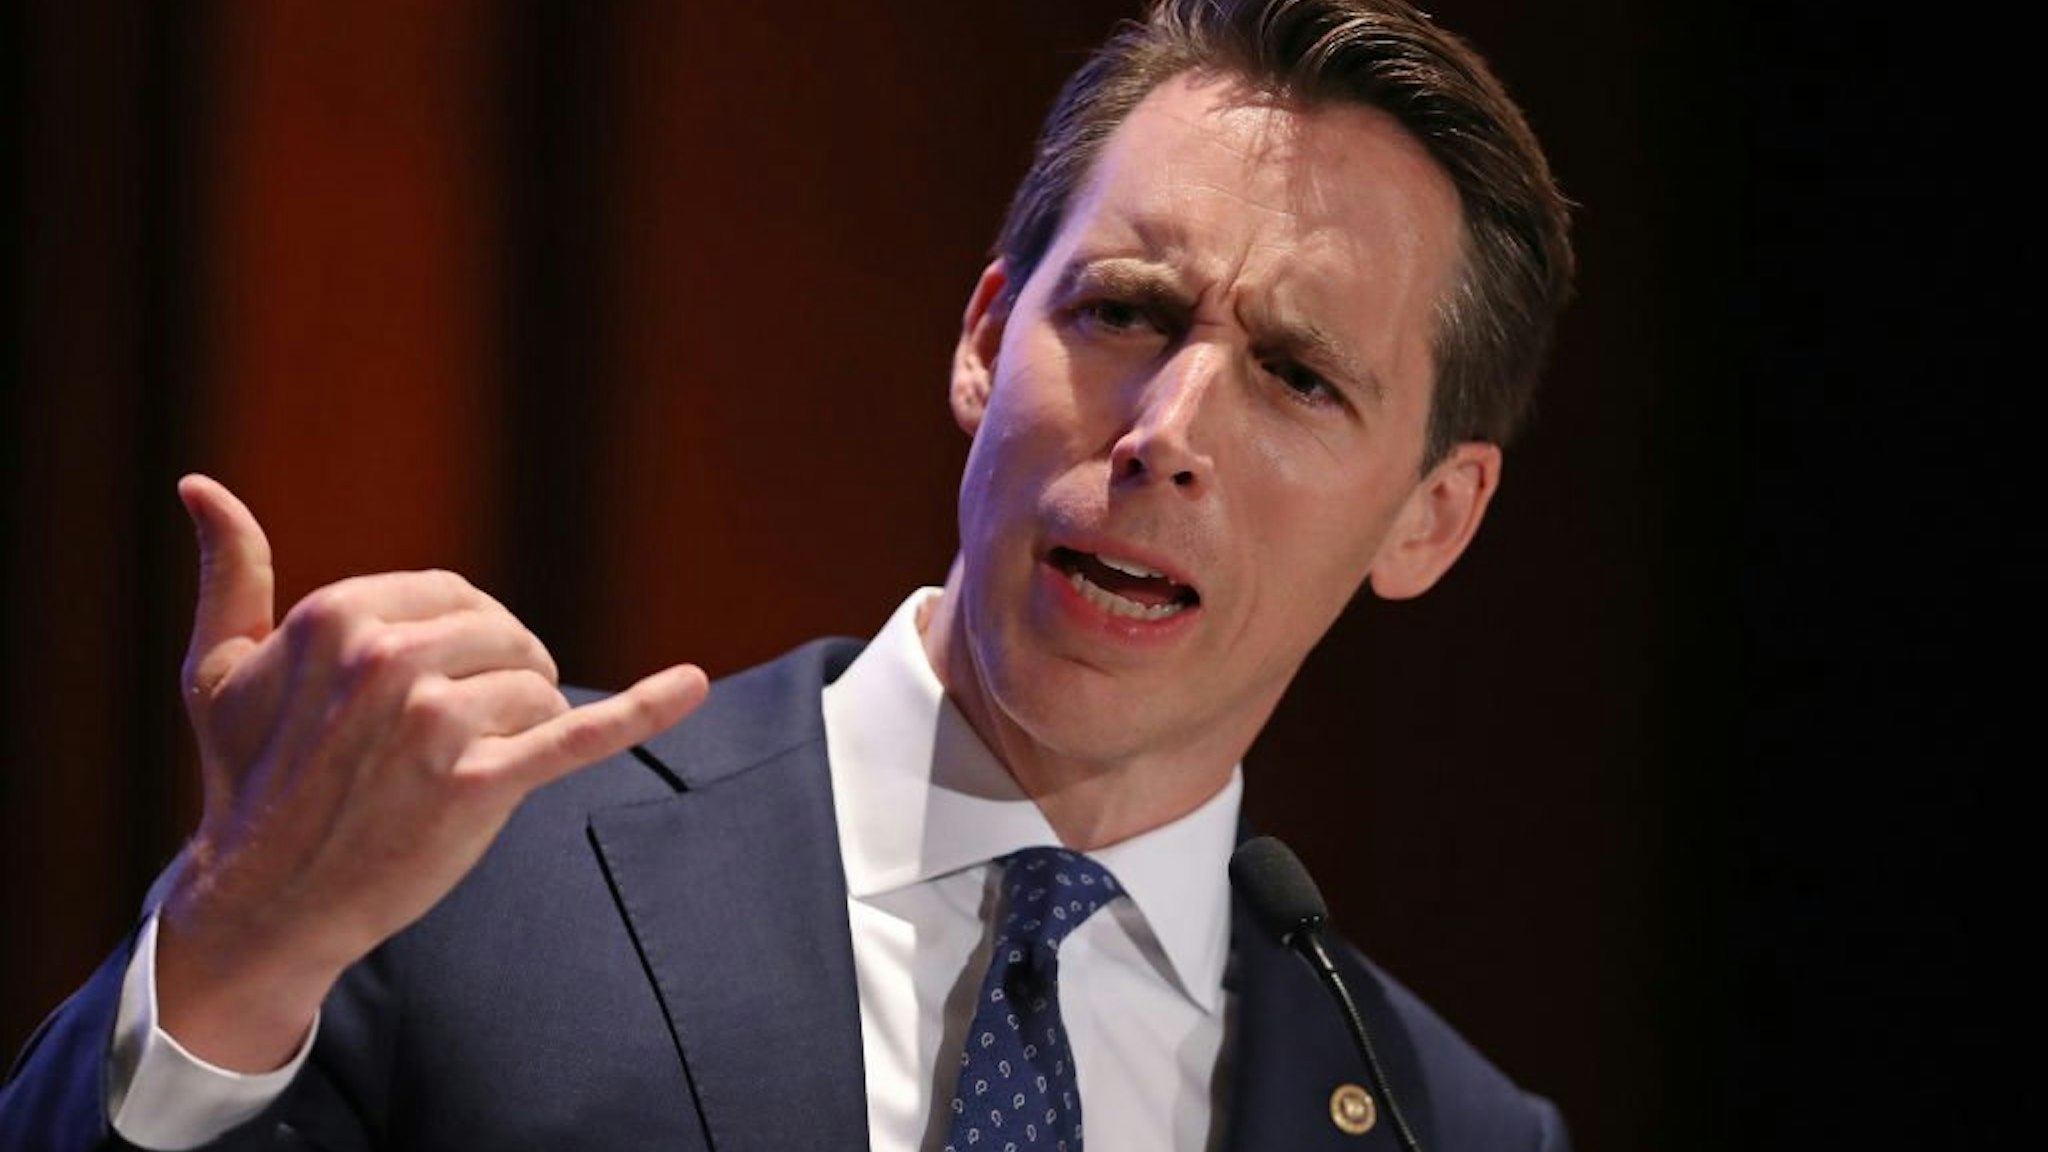 Josh Hawley addresses the Faith and Freedom Coalition's Road to Majority Policy Conference